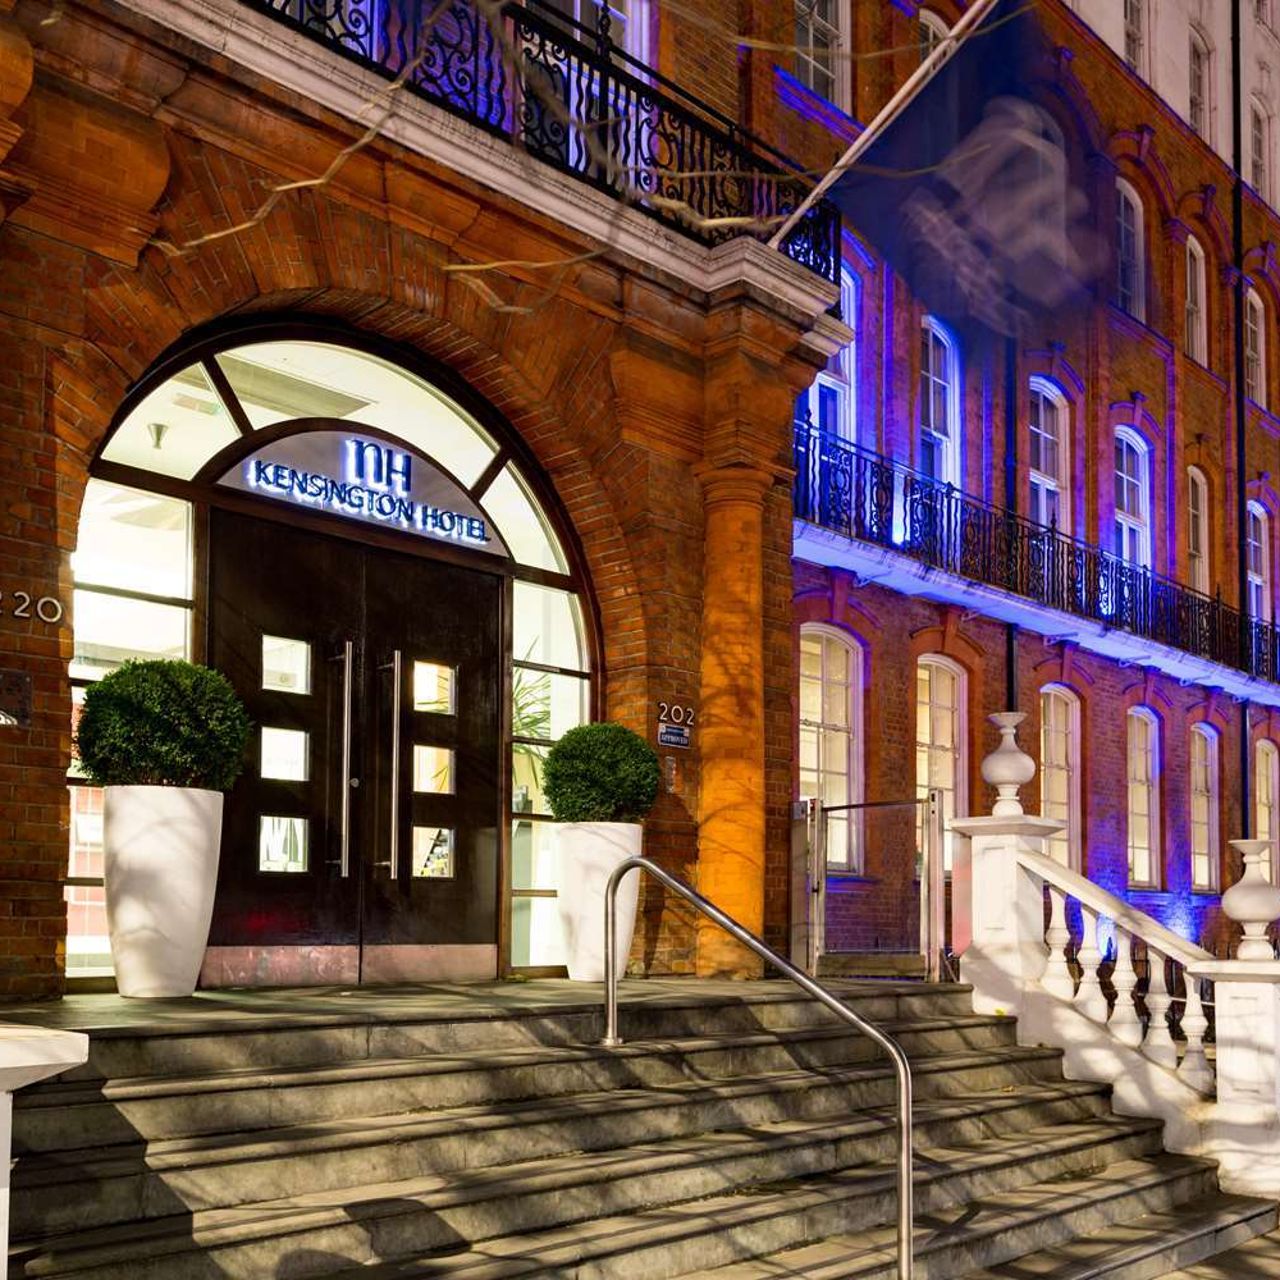 Hotel NH London Kensington - Great prices at HOTEL INFO